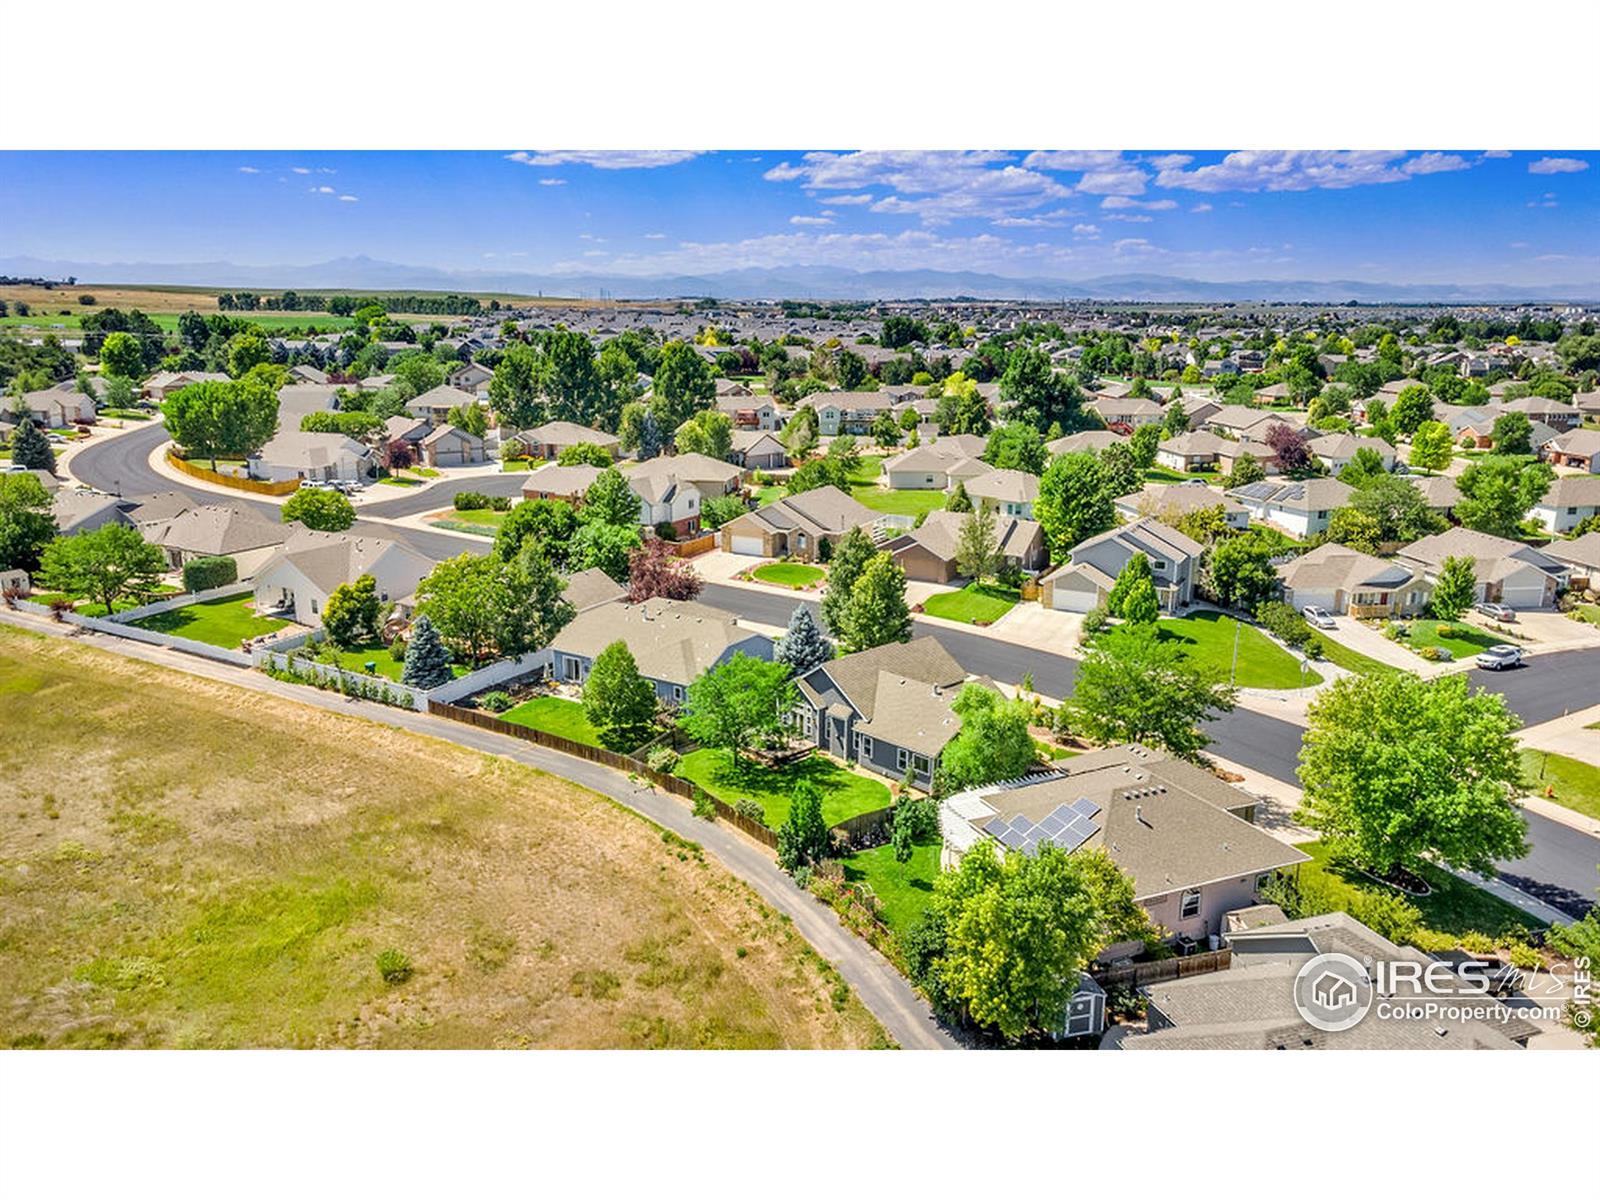 6800 23rd, Greeley, CO